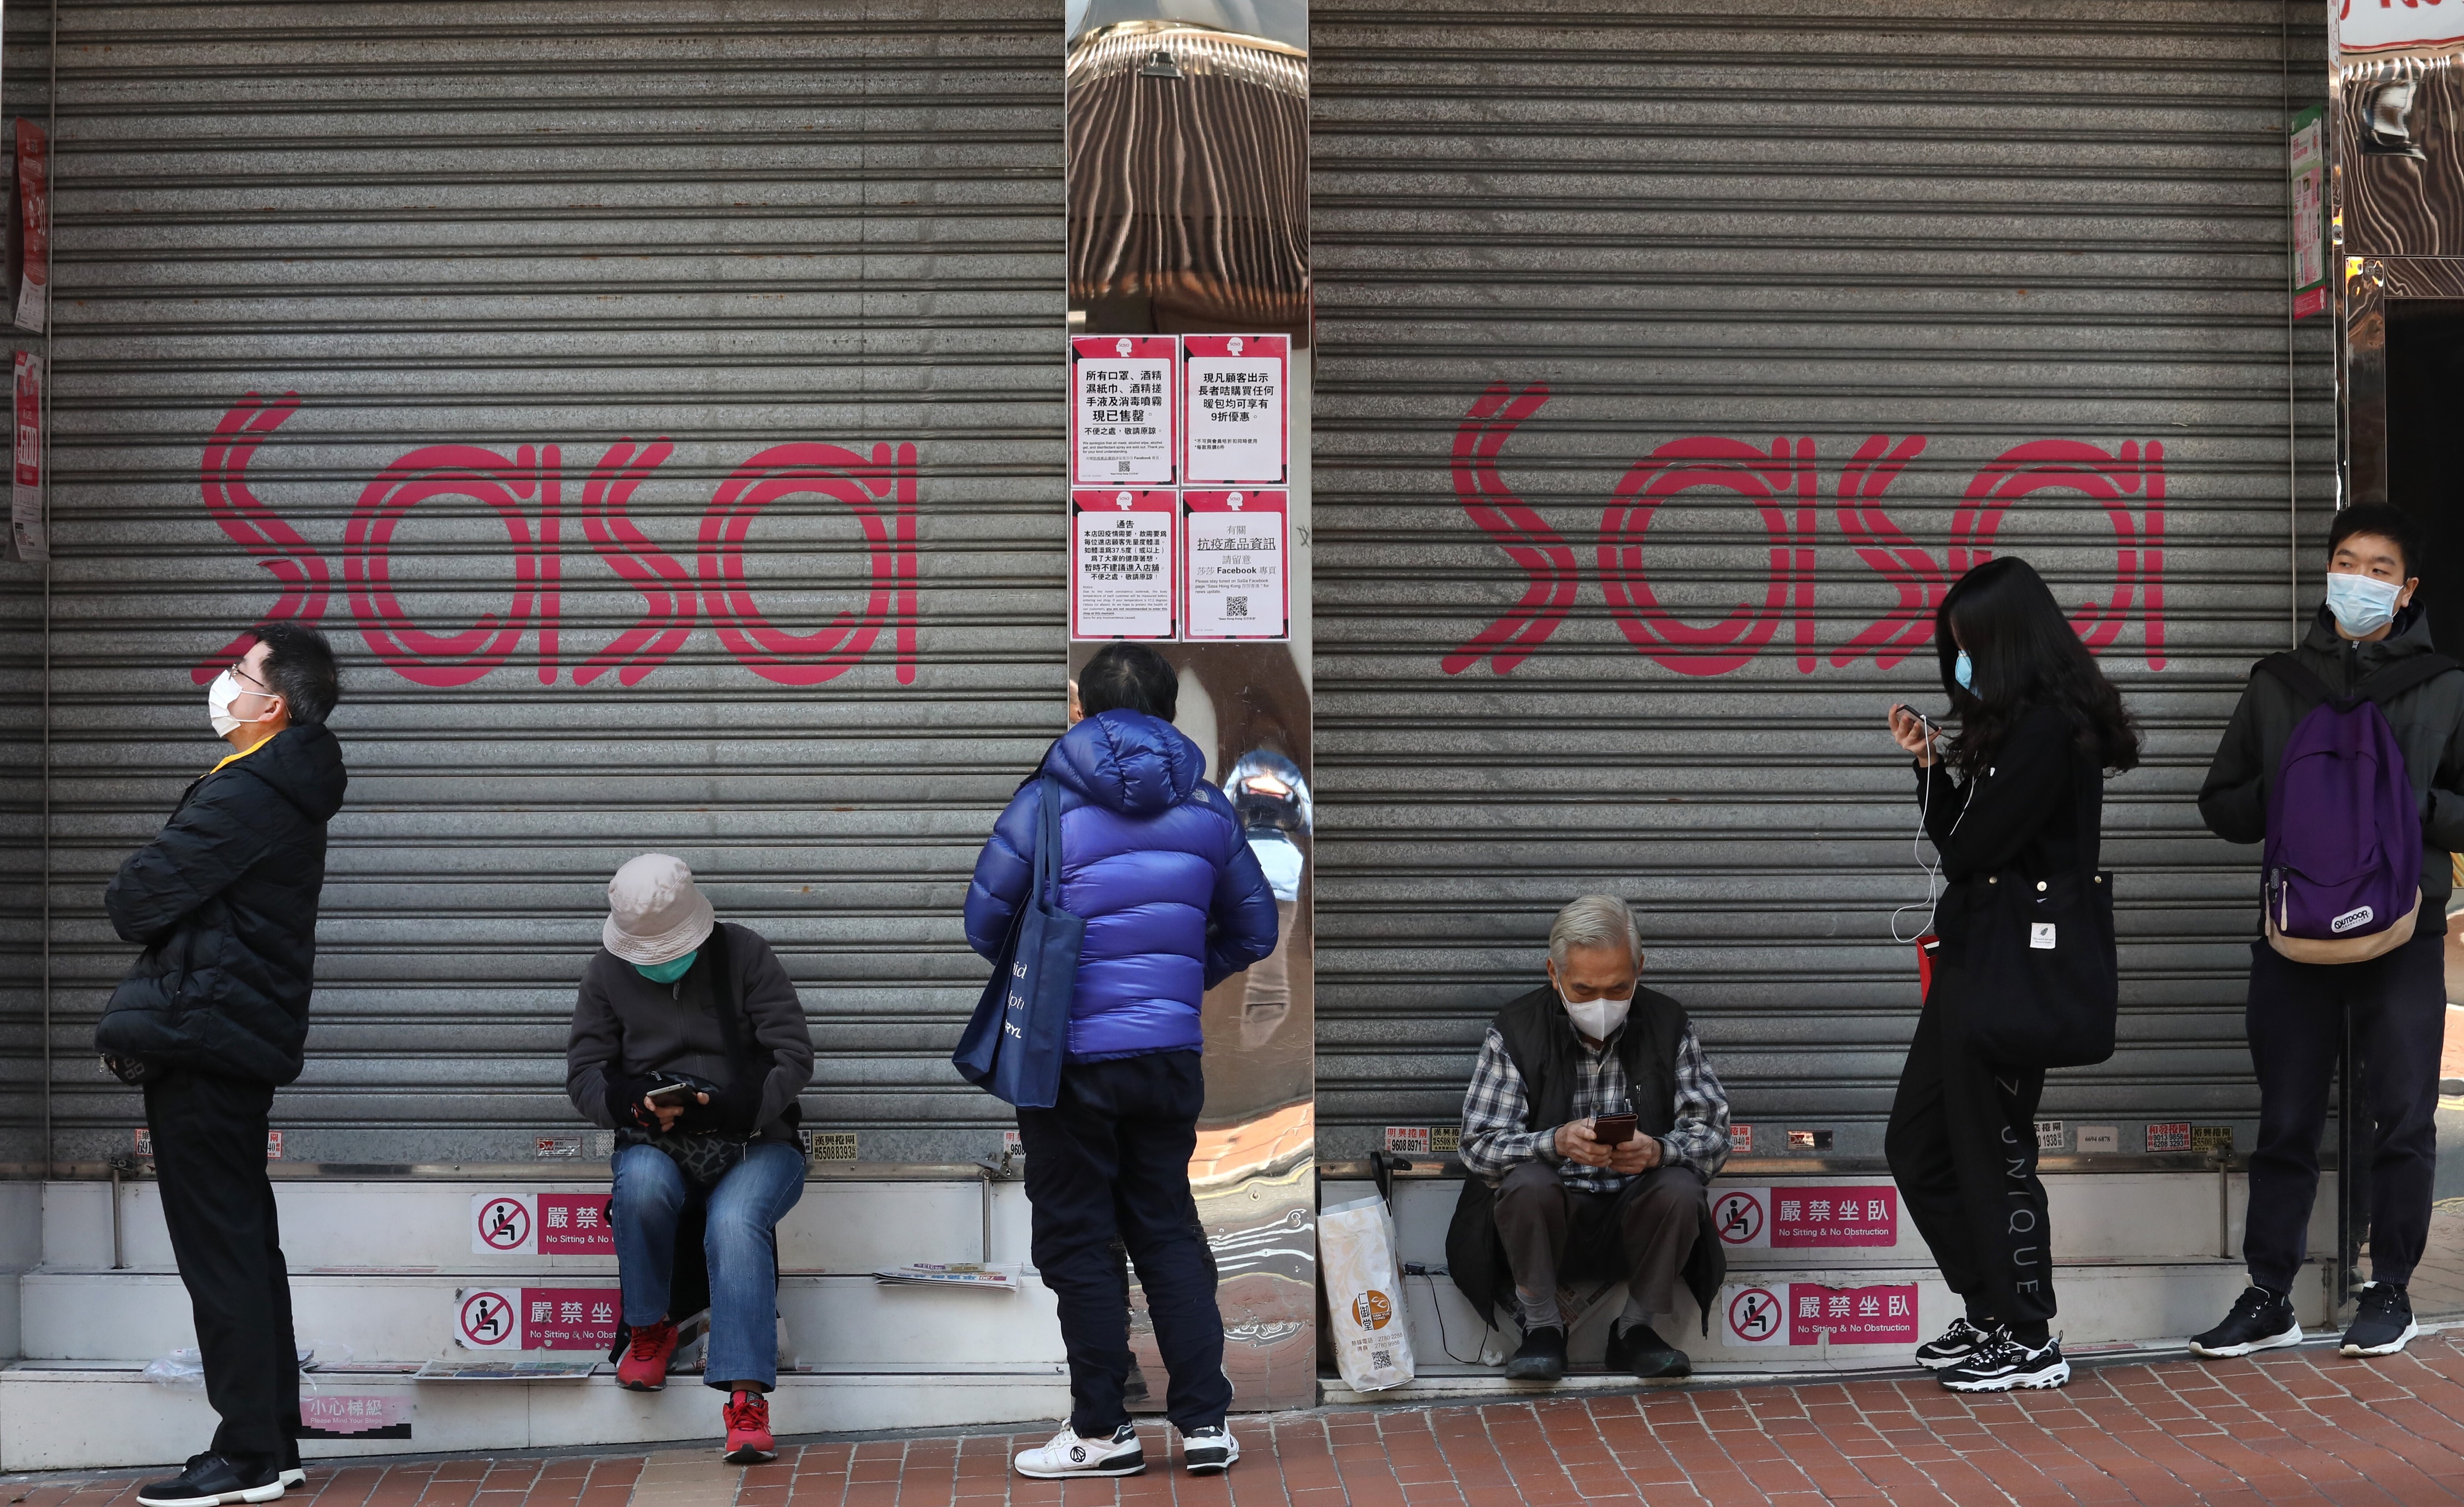 The queue of people, waiting in line for the opening of a pharmacy to buy surgical masks outside a shuttered Sasa outlet at Jardine's Bazaar in Hong Kong. Photo: Nora Tam